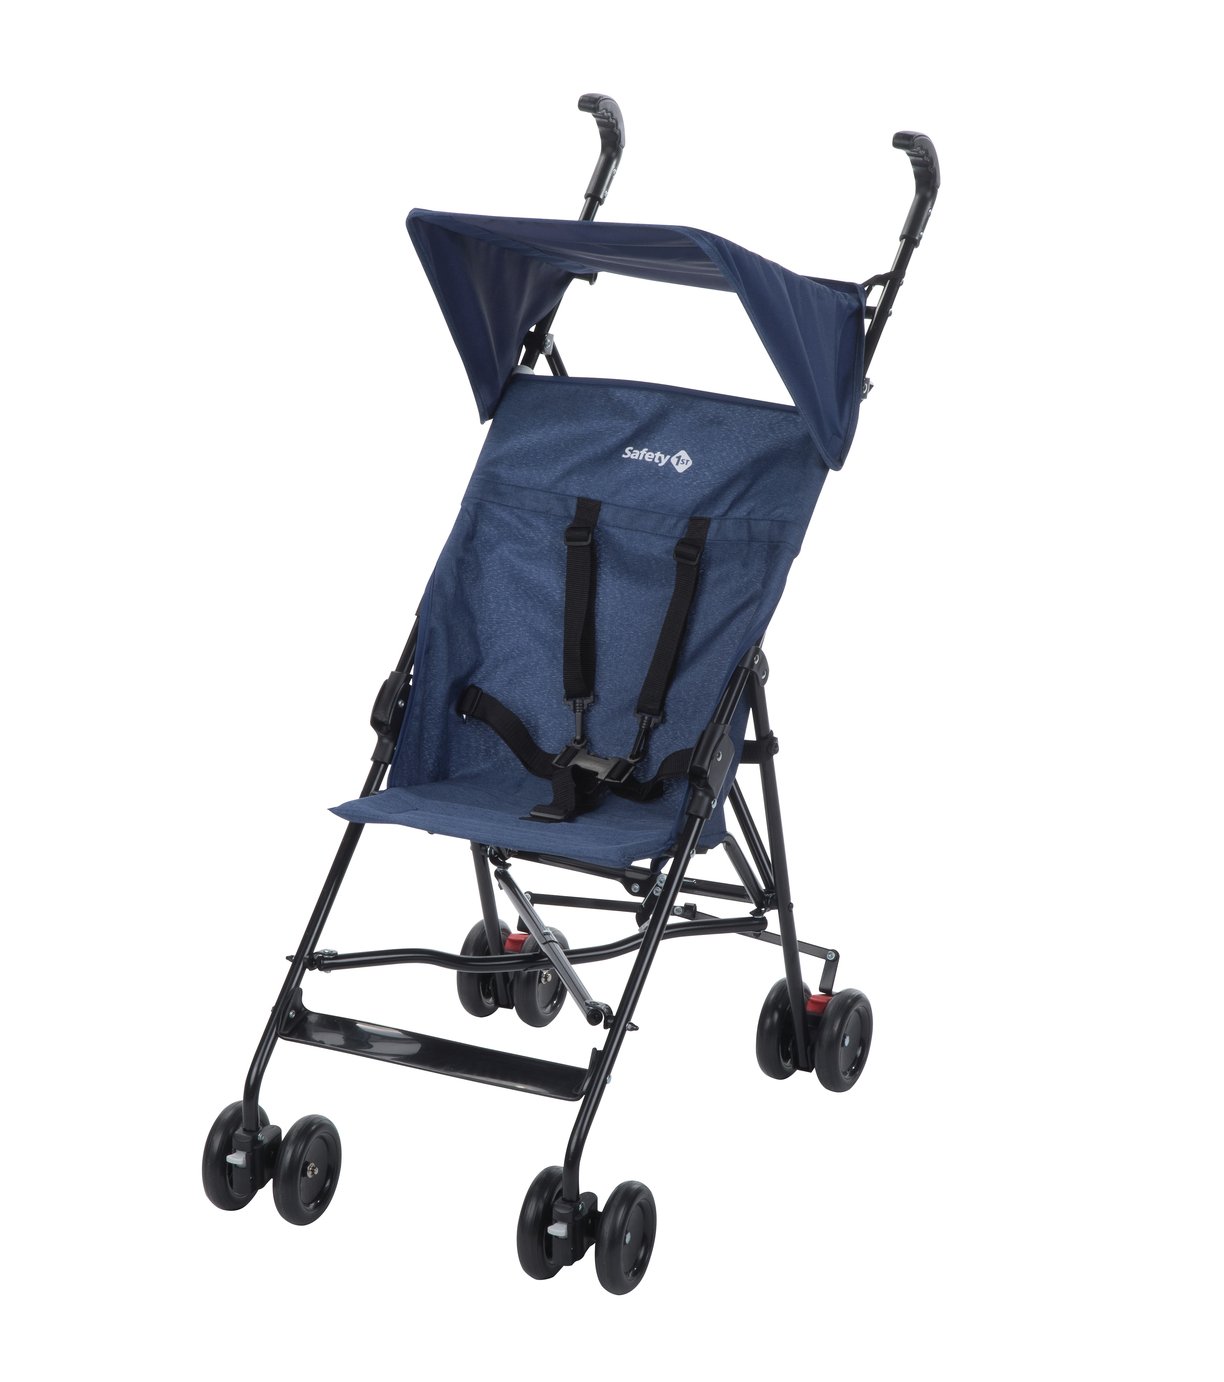 Safety 1st Pushchair Including Canopy Review